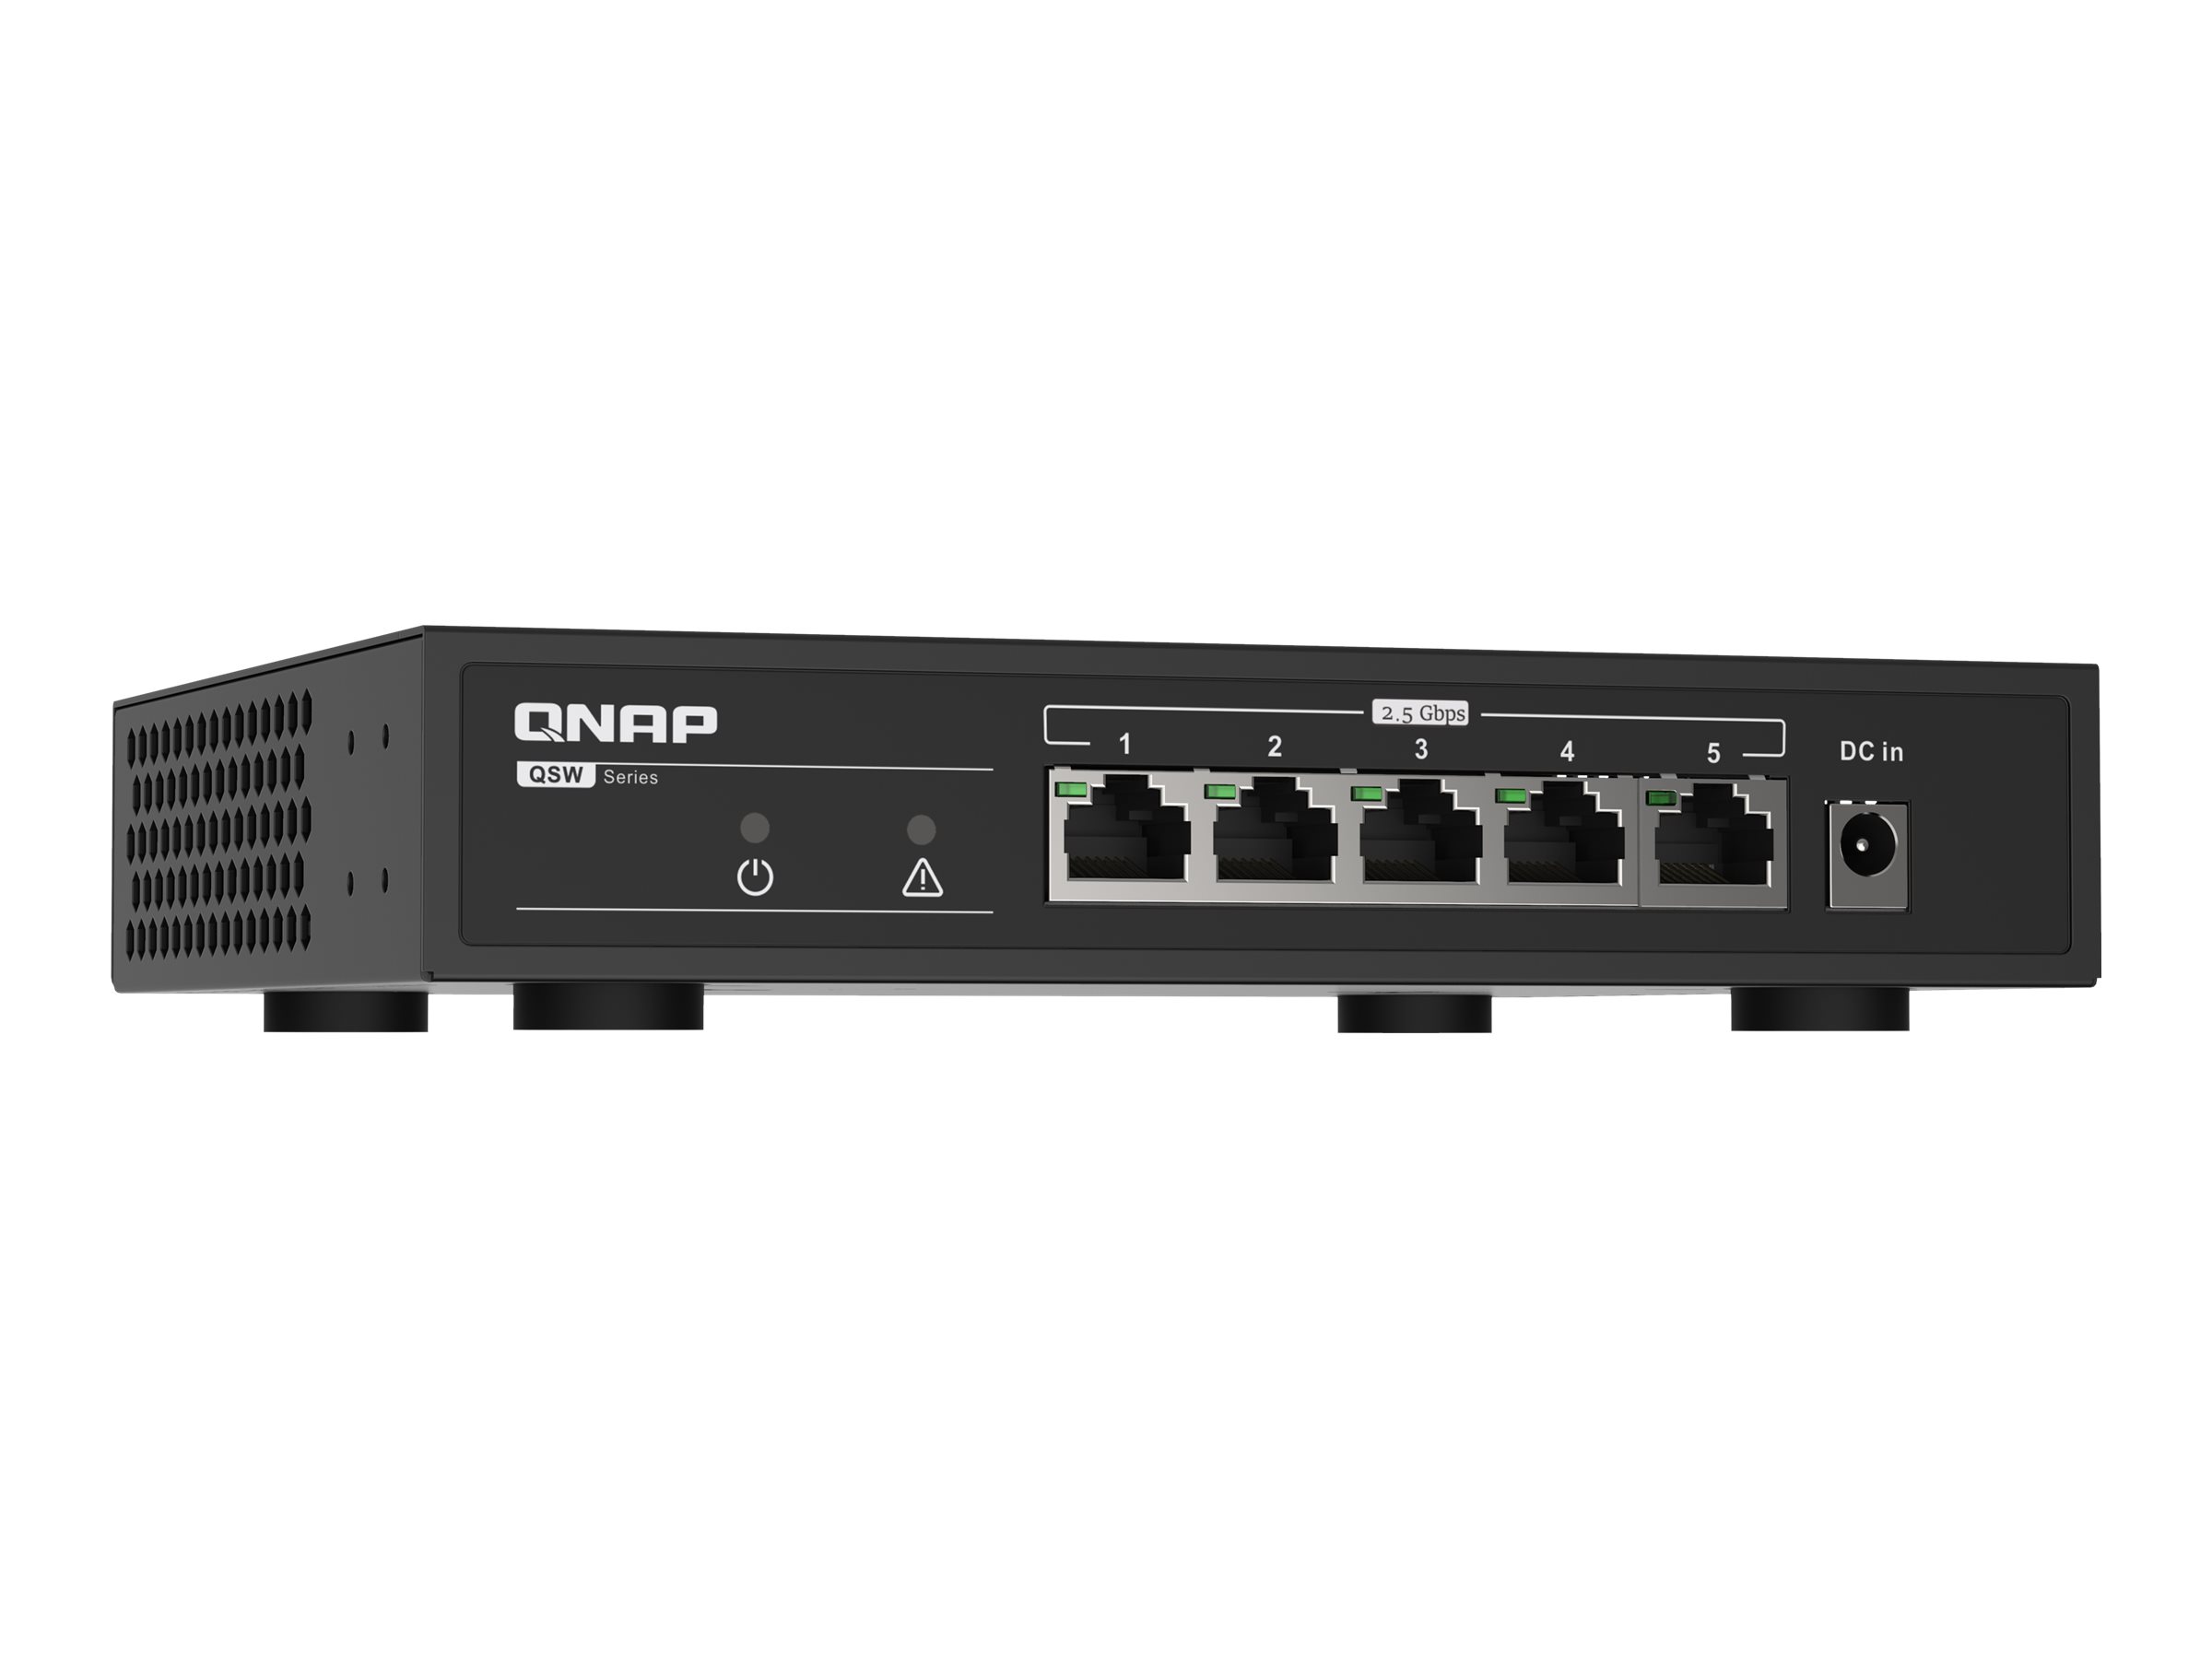 QNAP QSW-1105-5T - Switch - unmanaged - 5 x 10/100/1000/2.5G